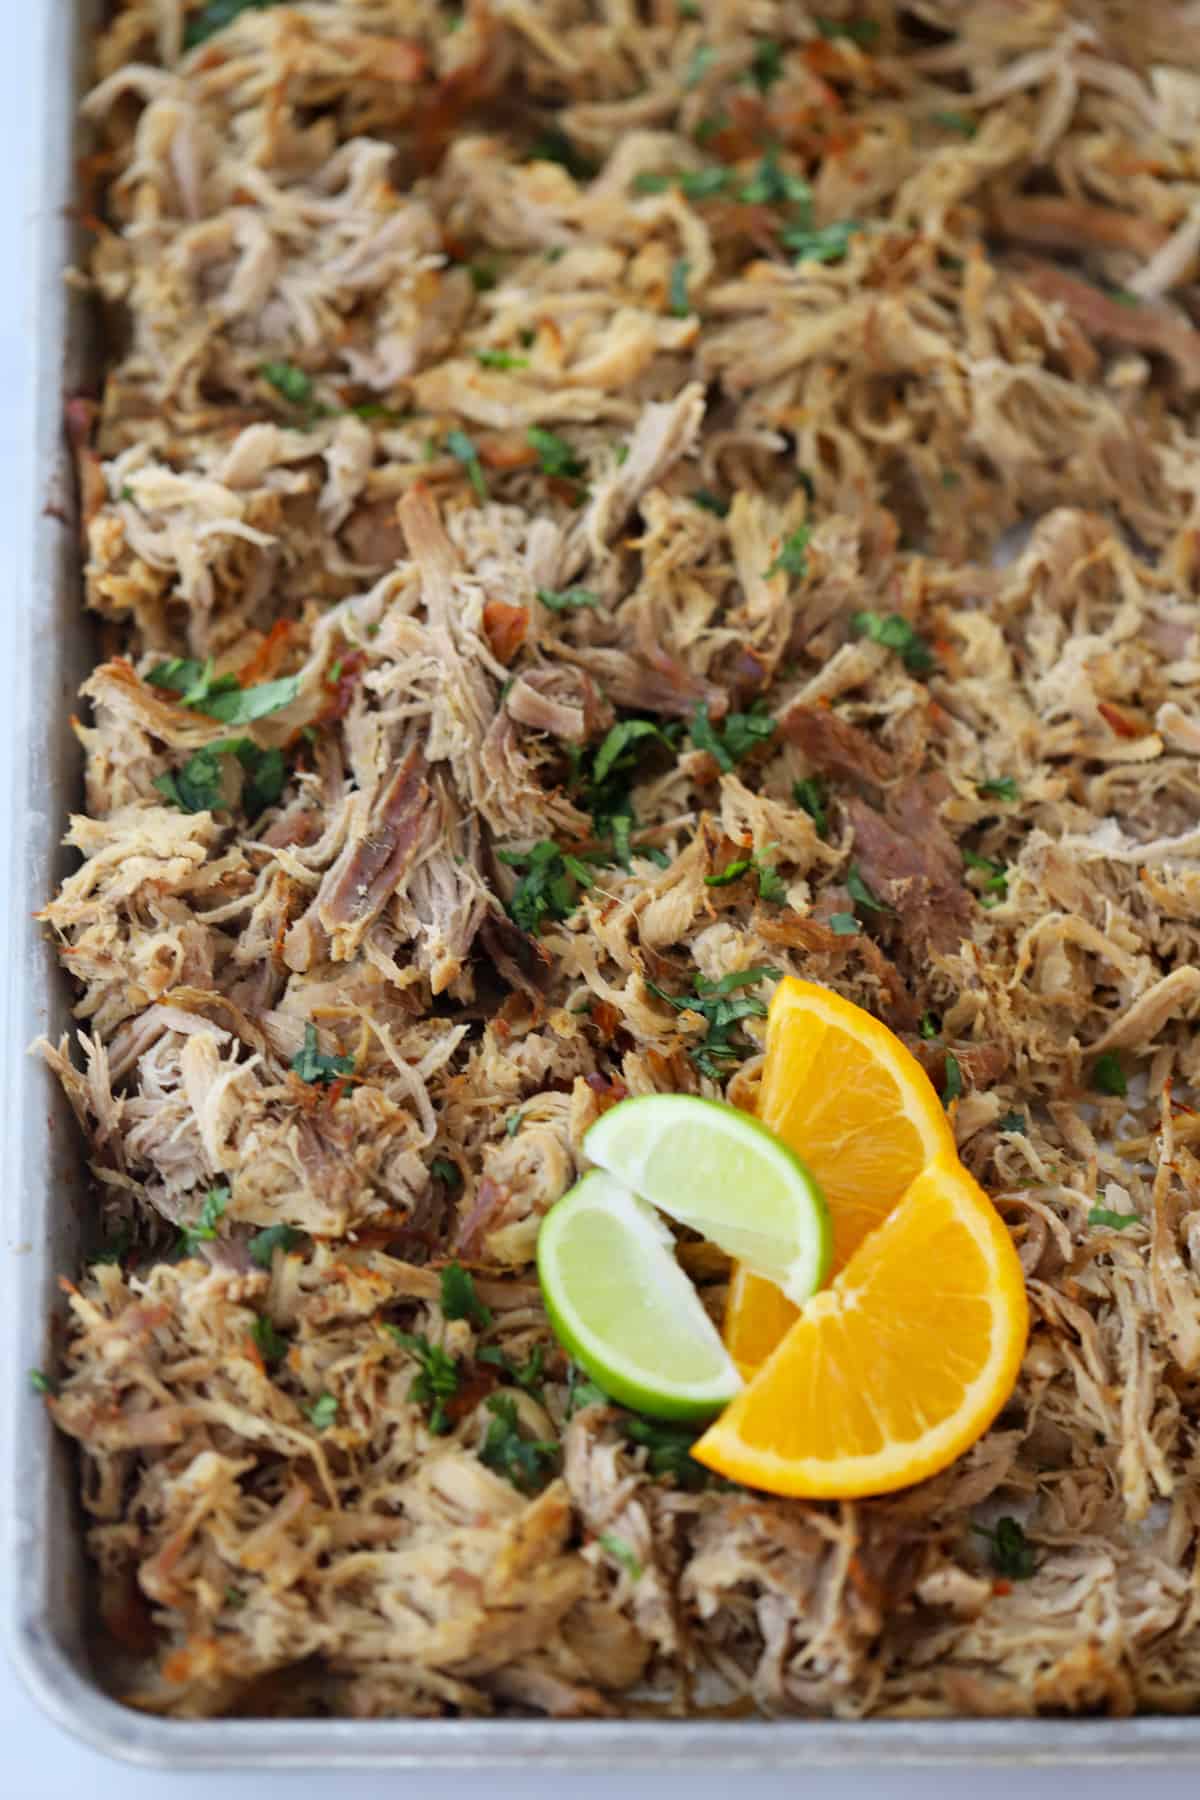 Carnitas spread out on a sheet tray, garnished with fresh cilantro, fresh limes and fresh oranges.